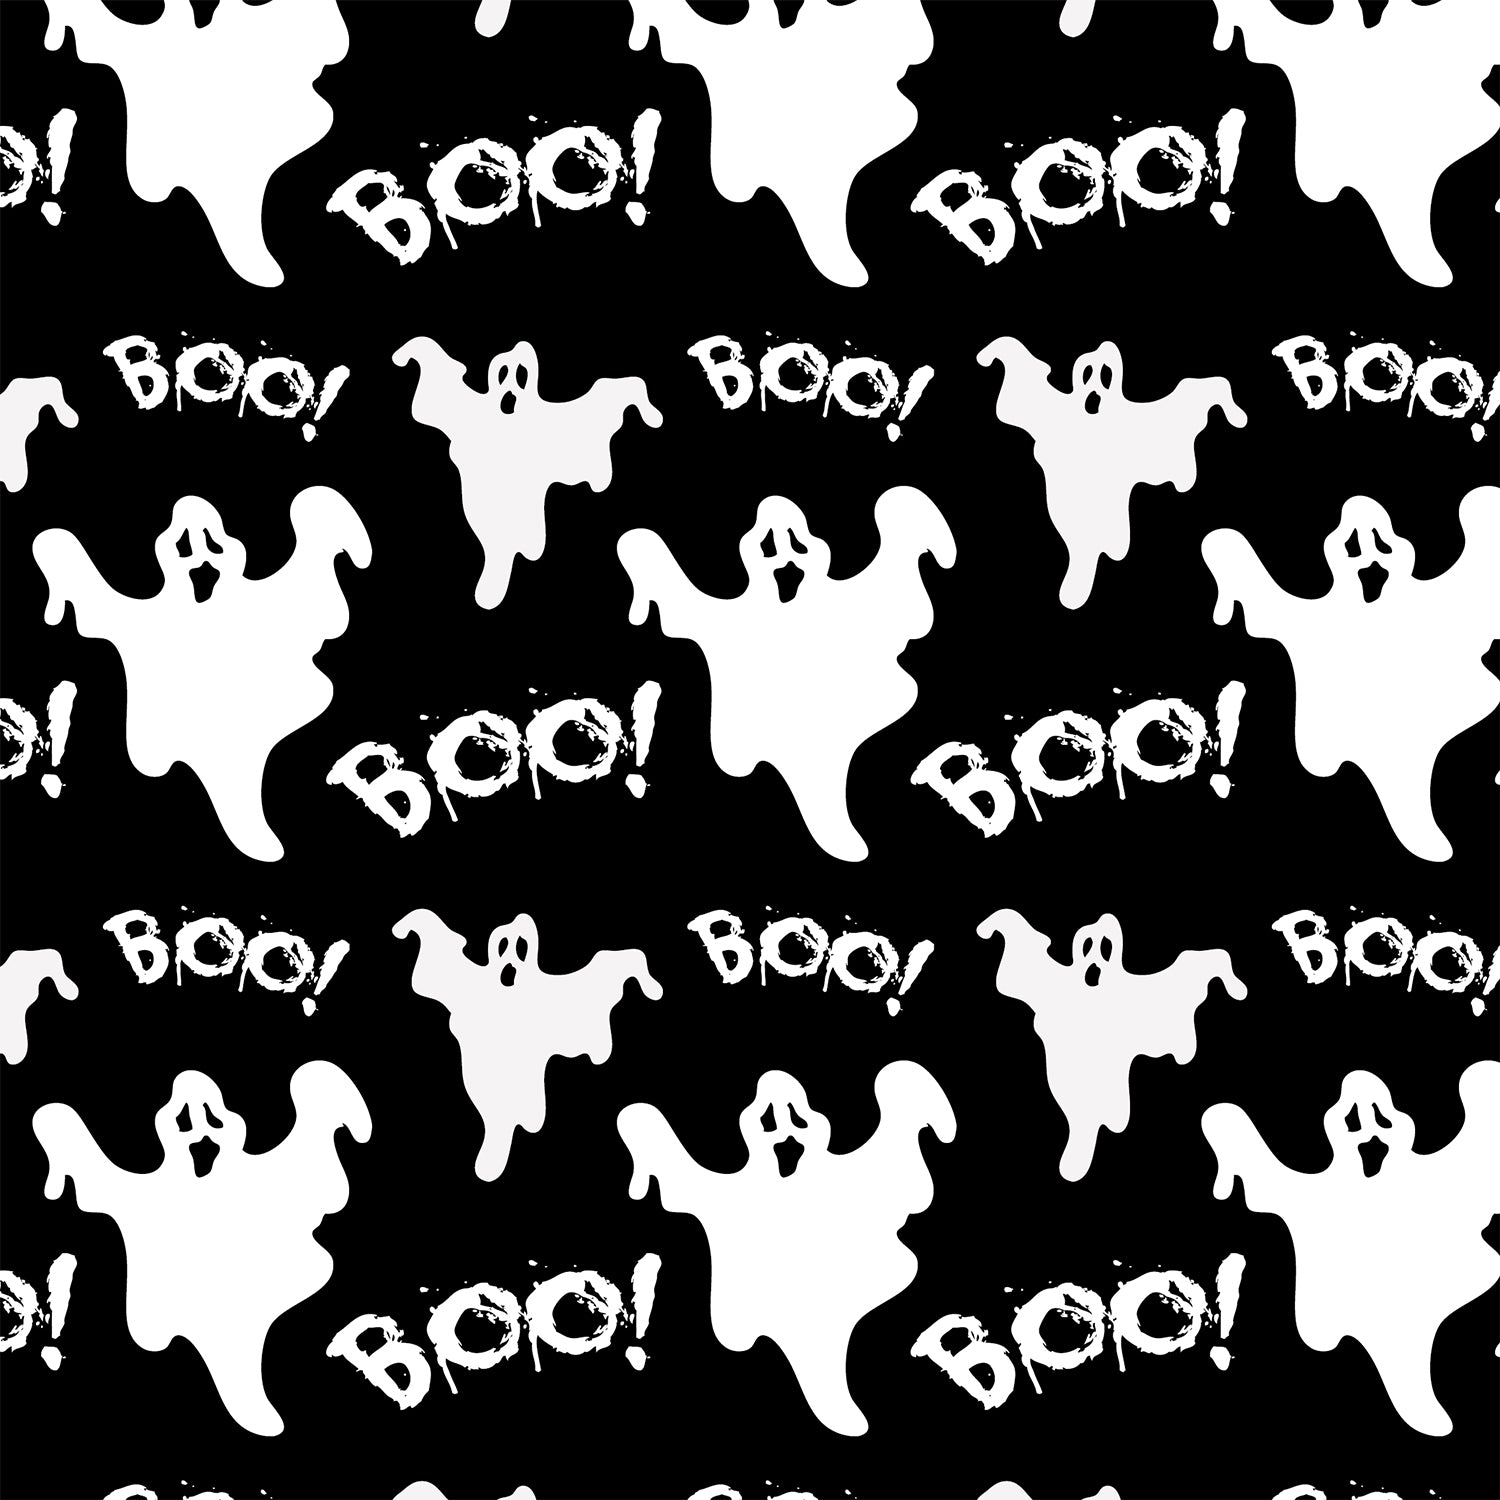 Halloween Boo Ghost Flat Wrapping Paper Sheet Wholesale Wraphaholic